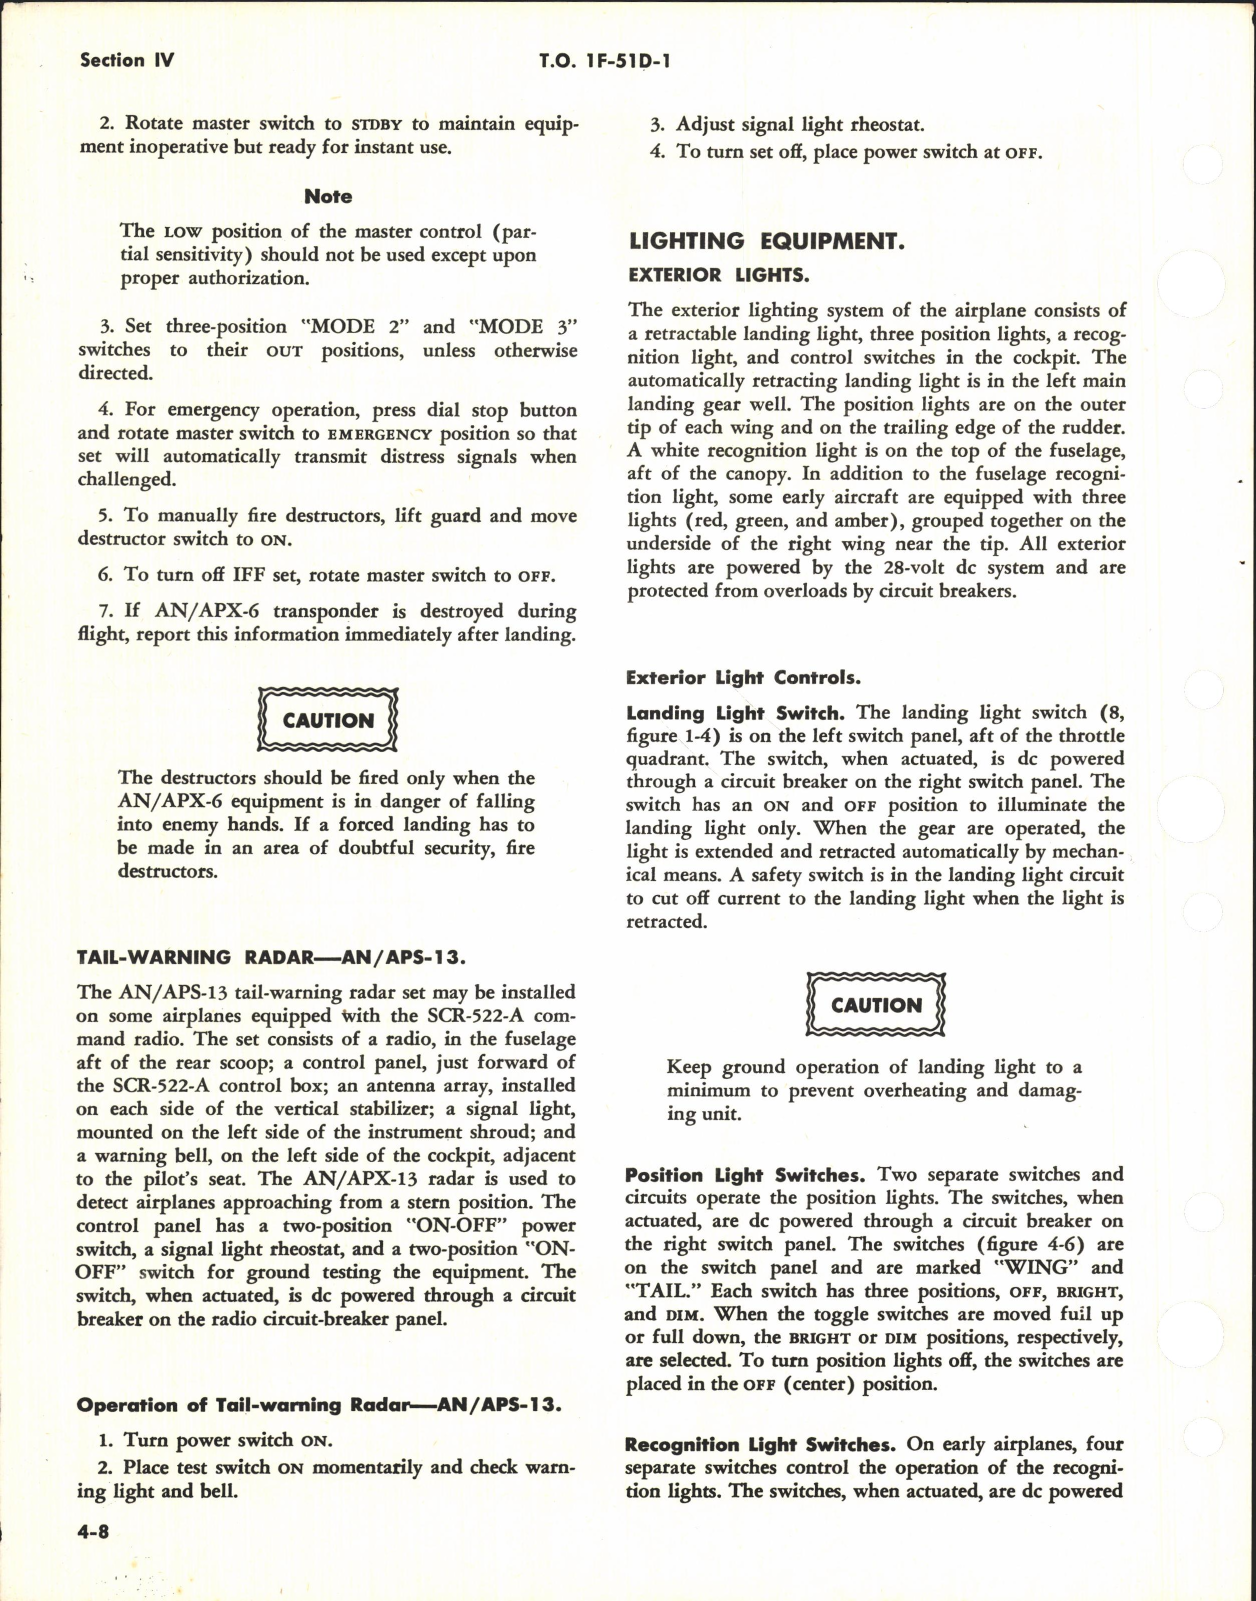 Sample page 8 from AirCorps Library document: Pilot's Flight Instructions for F-51D